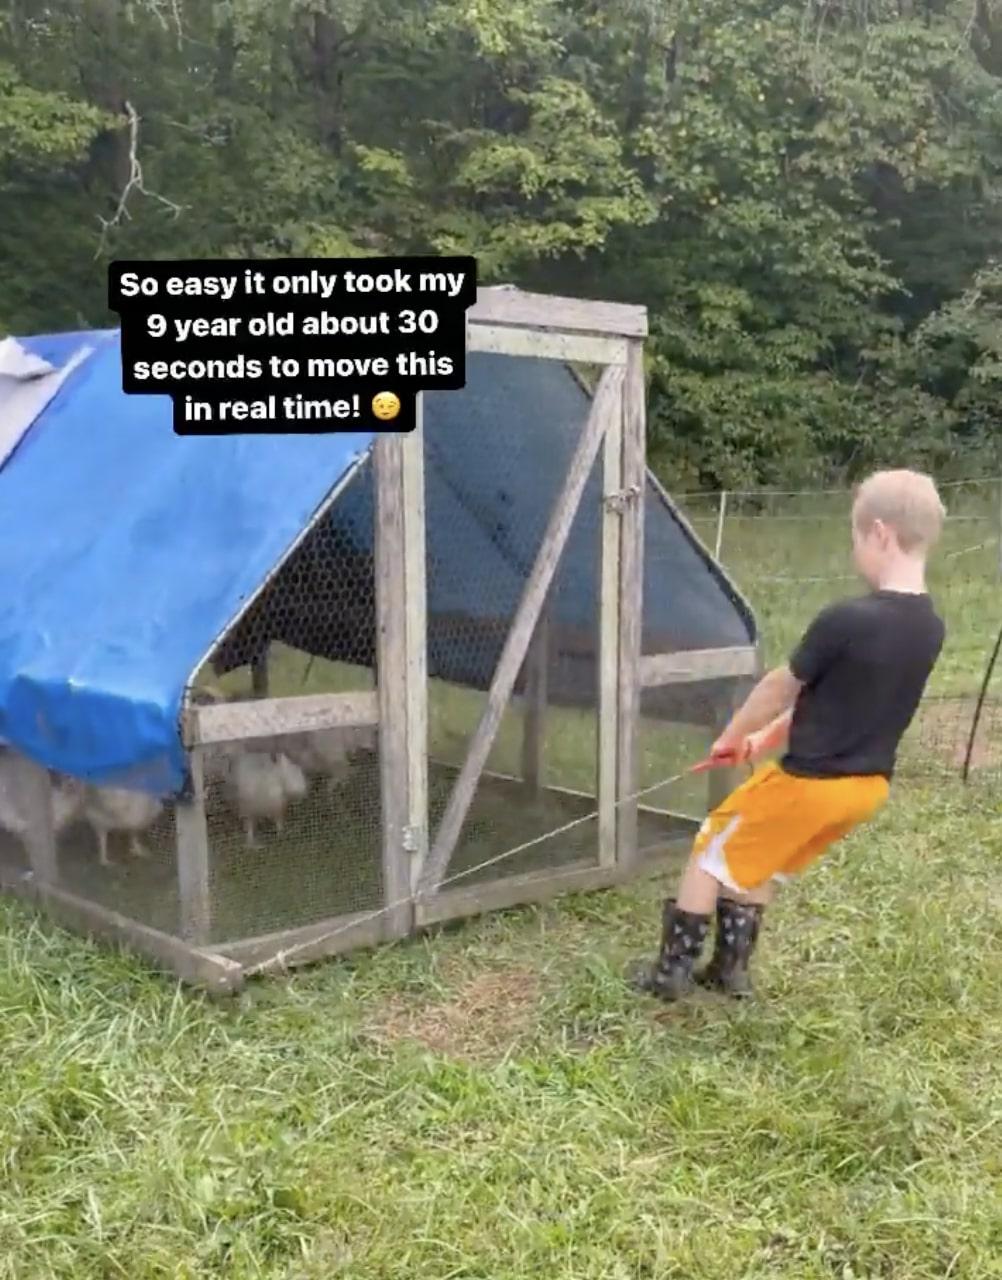 Cortney and Samuel Black's son moves the chicken coop. (Courtesy of Cortney Black)